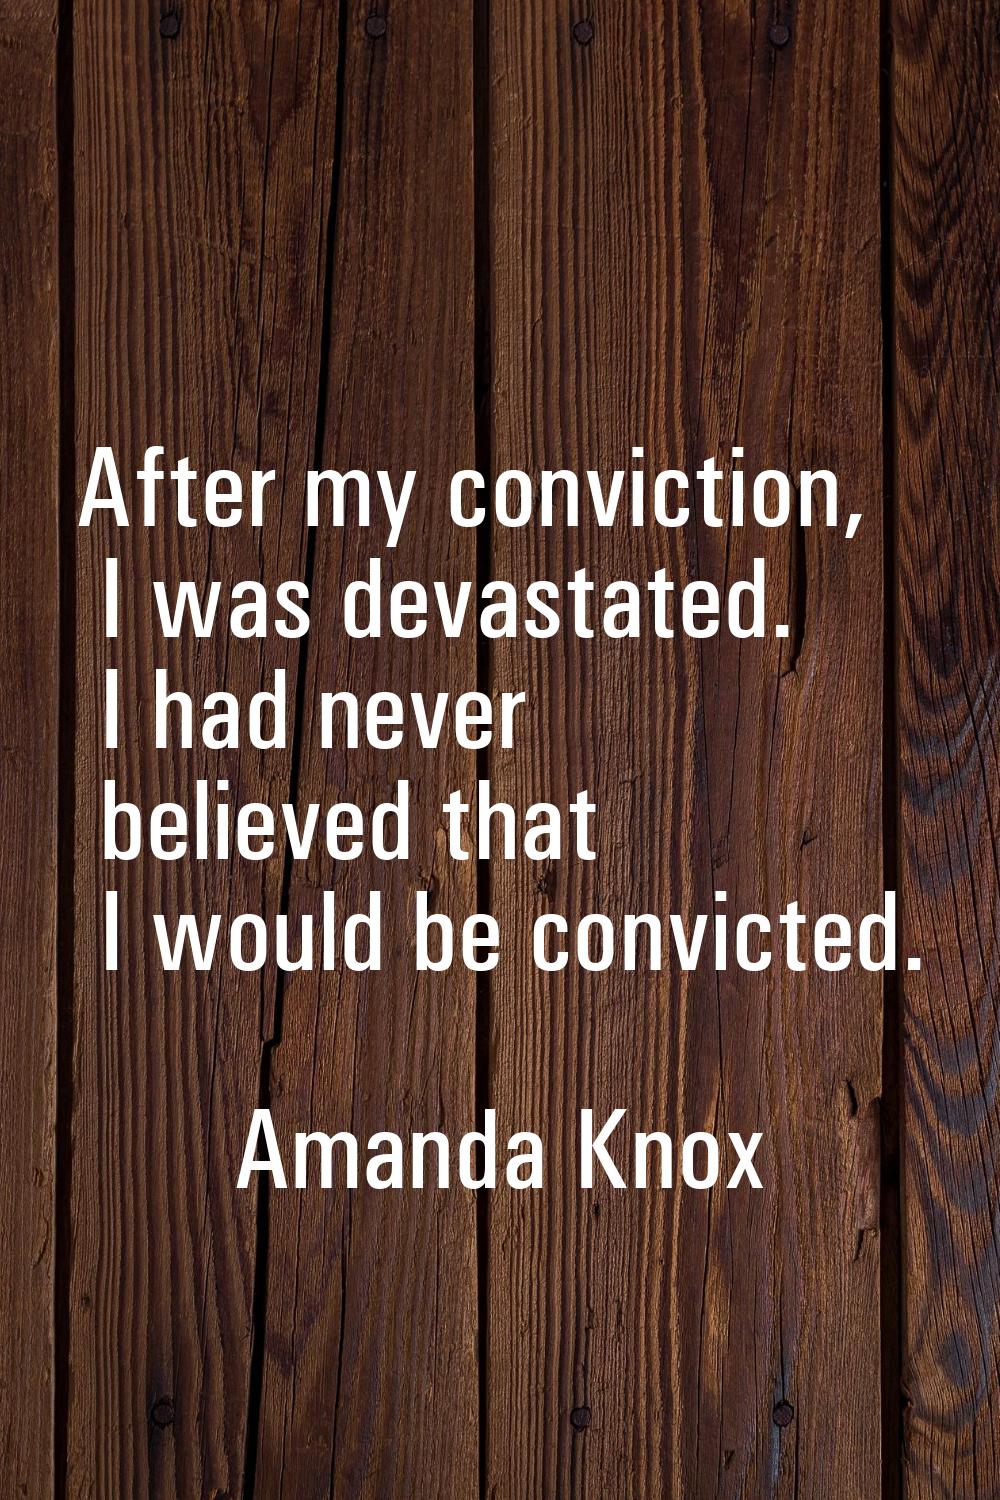 After my conviction, I was devastated. I had never believed that I would be convicted.